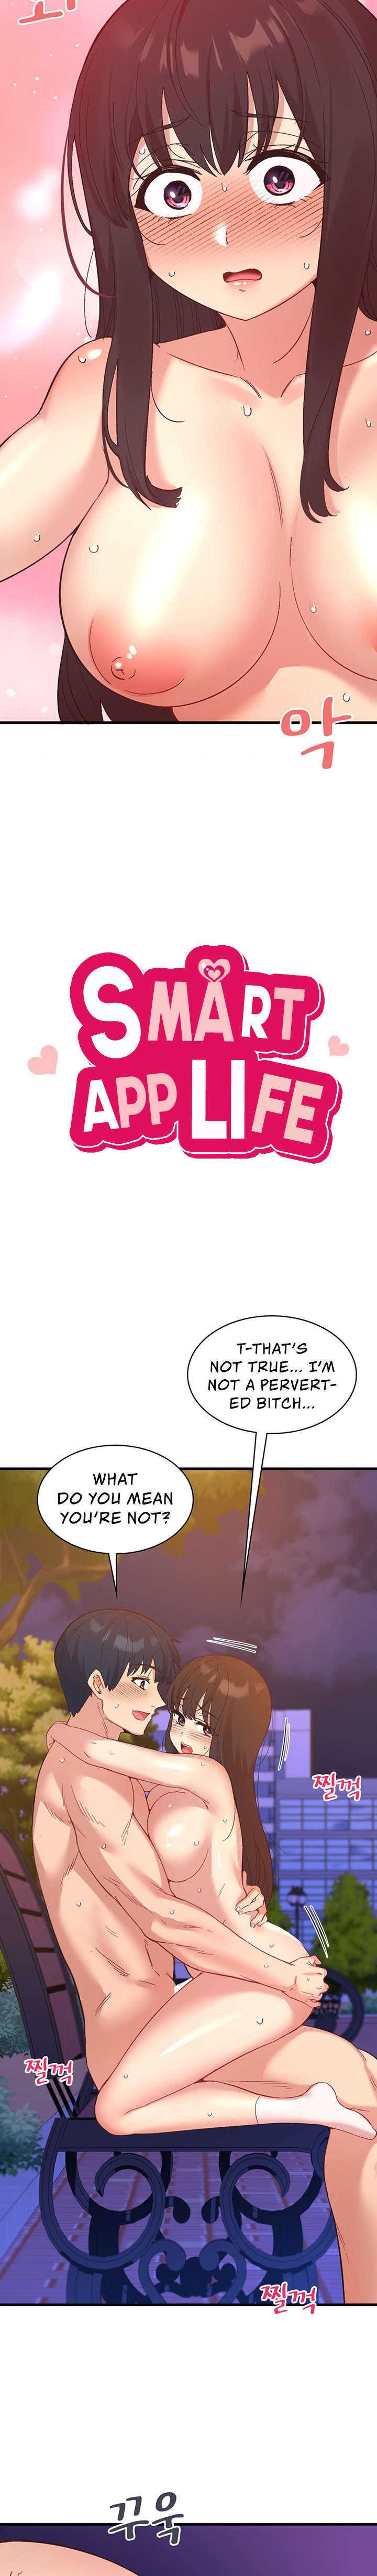 Smart App Life - Chapter 20 Page 3